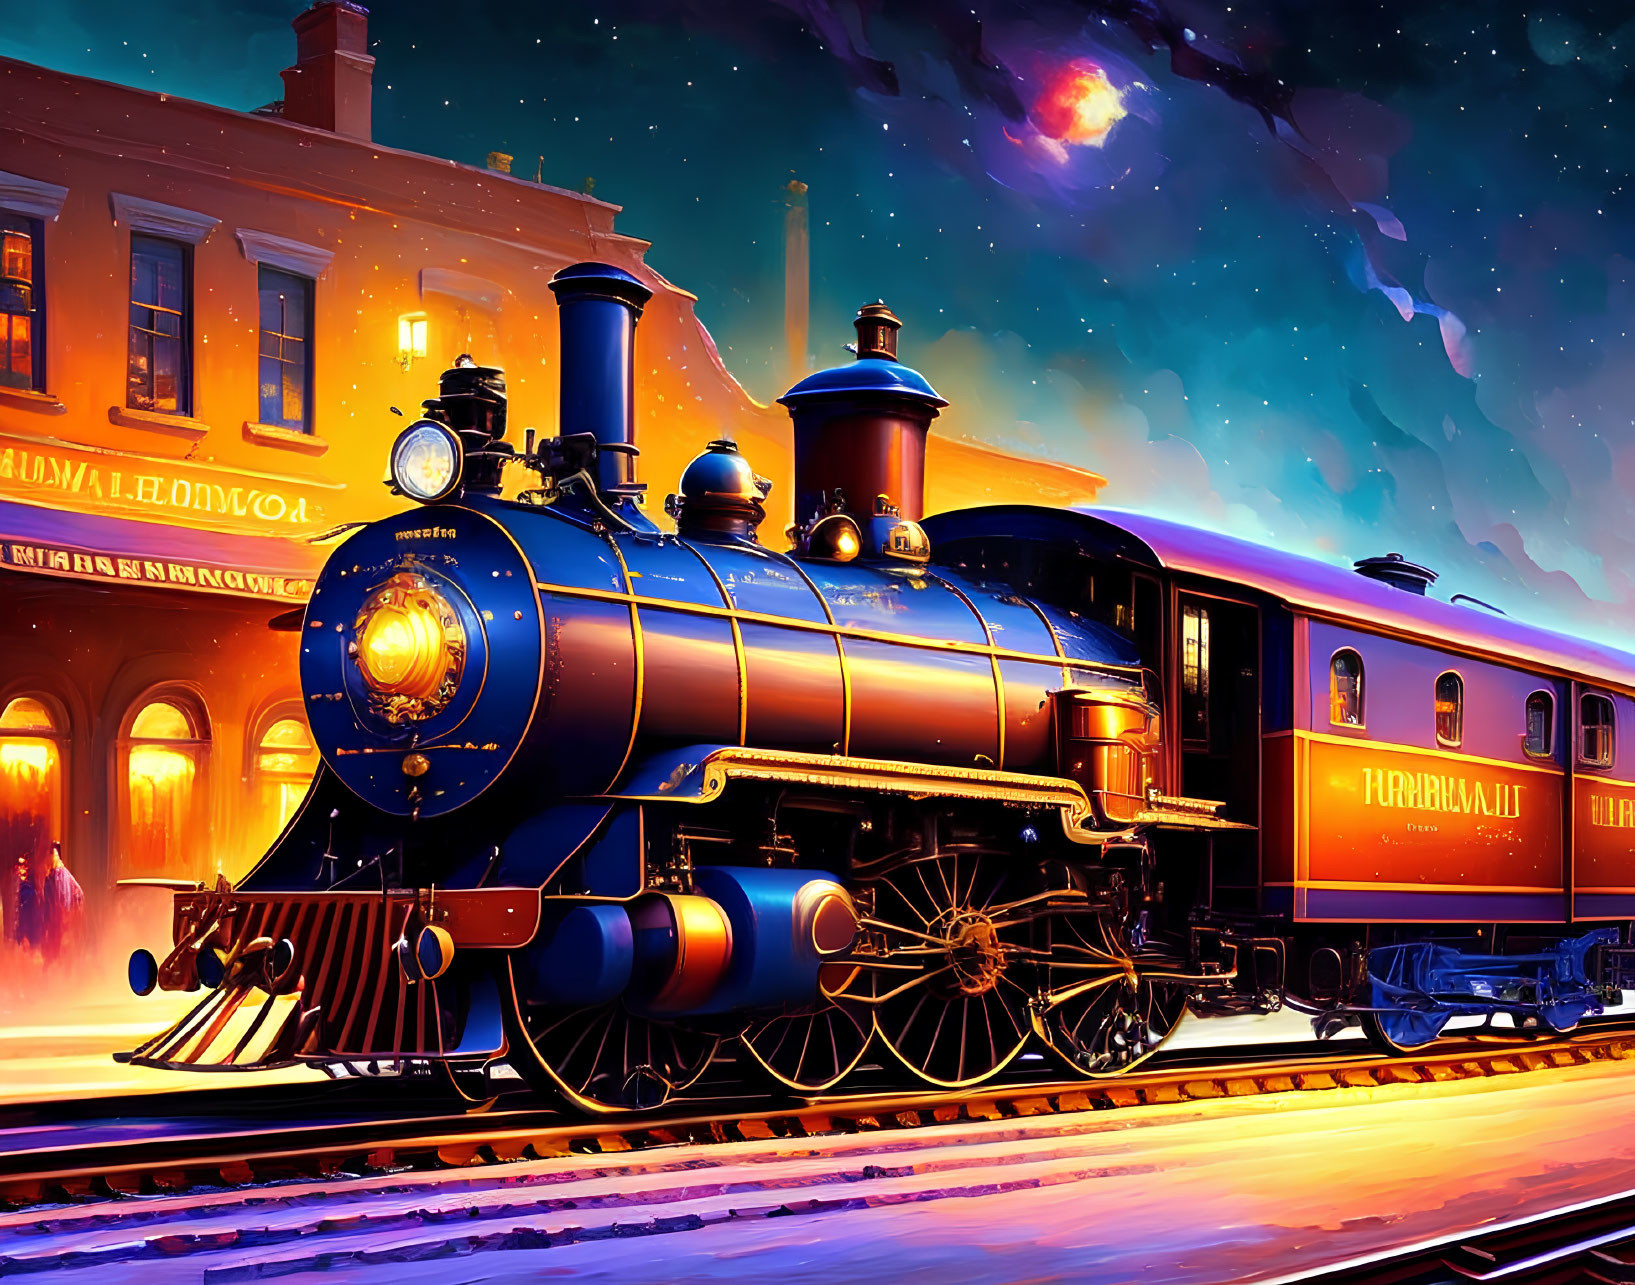 Colorful vintage steam locomotive at dusk station with galaxy hint